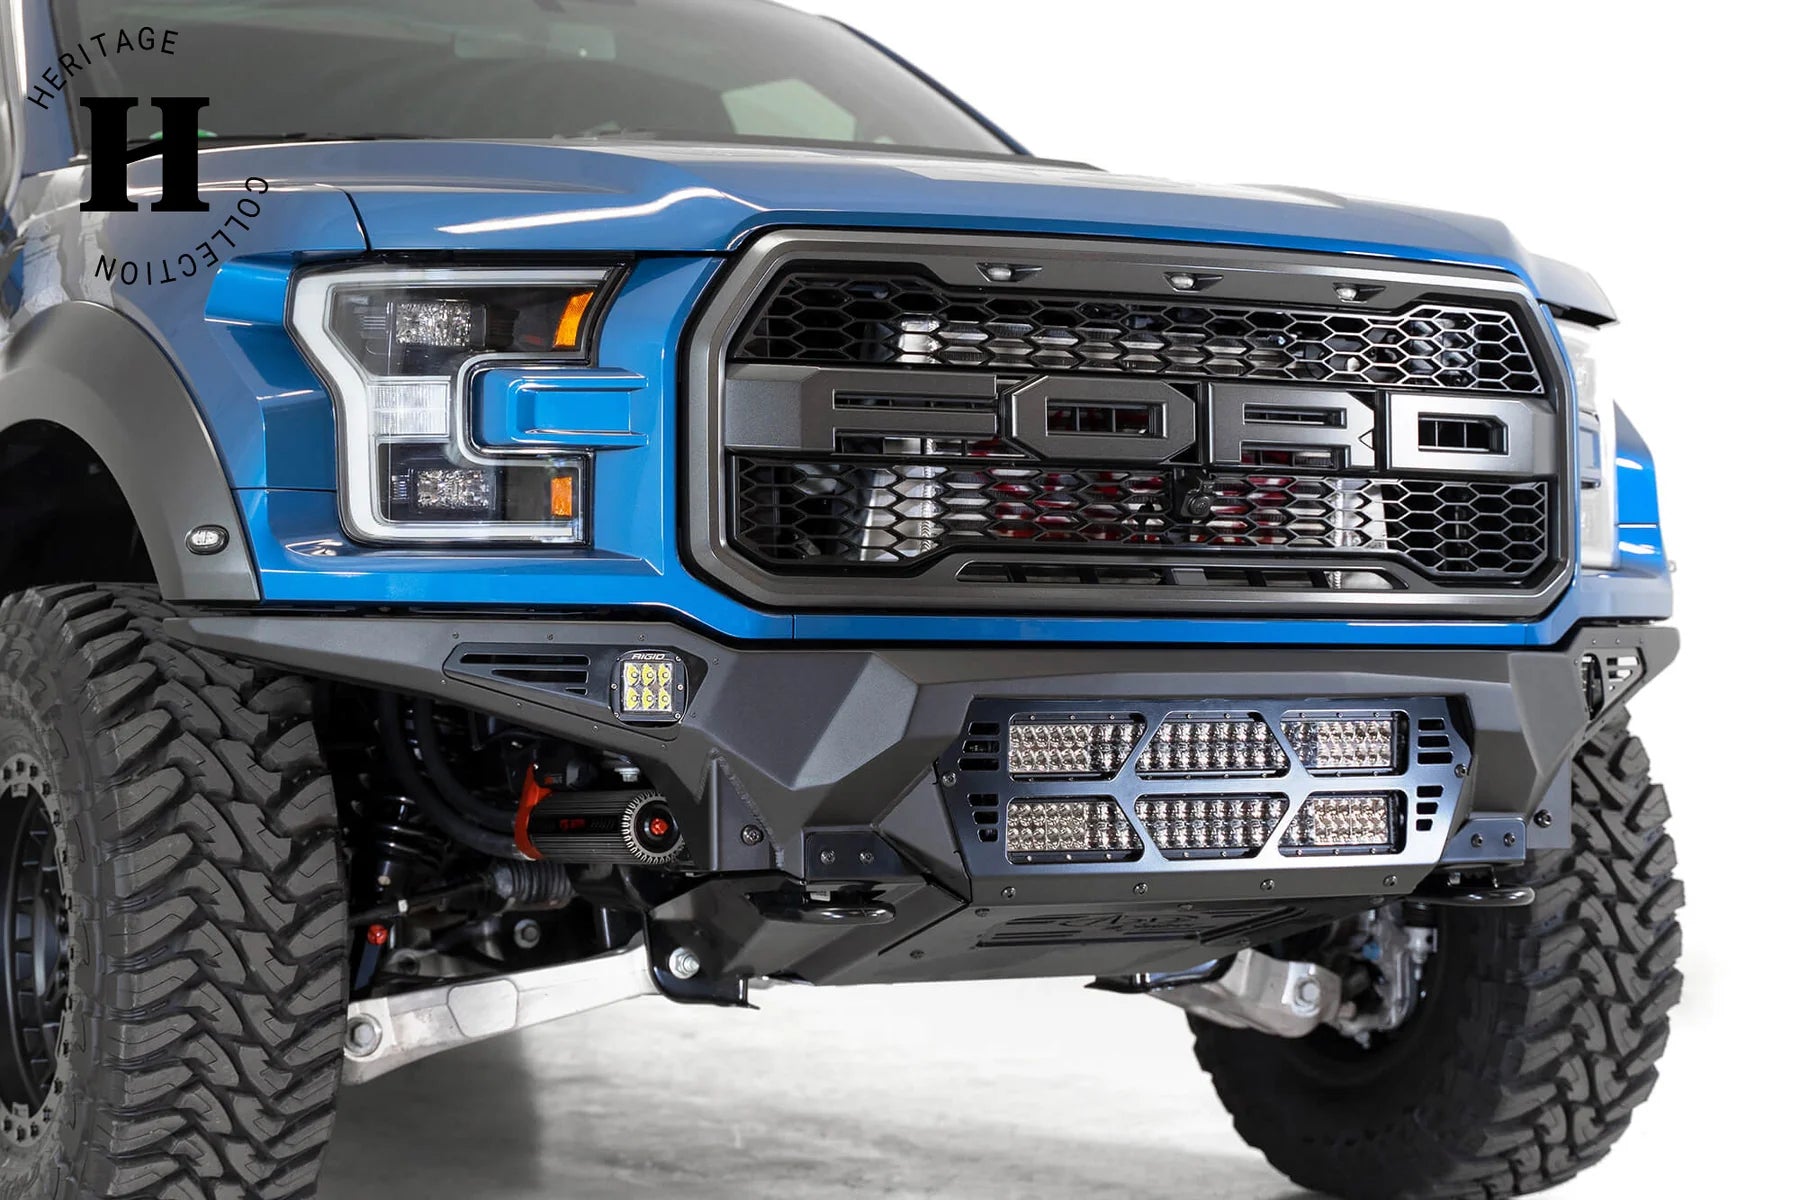 Add Offroad Ford Raptor Bomber Front Bumper